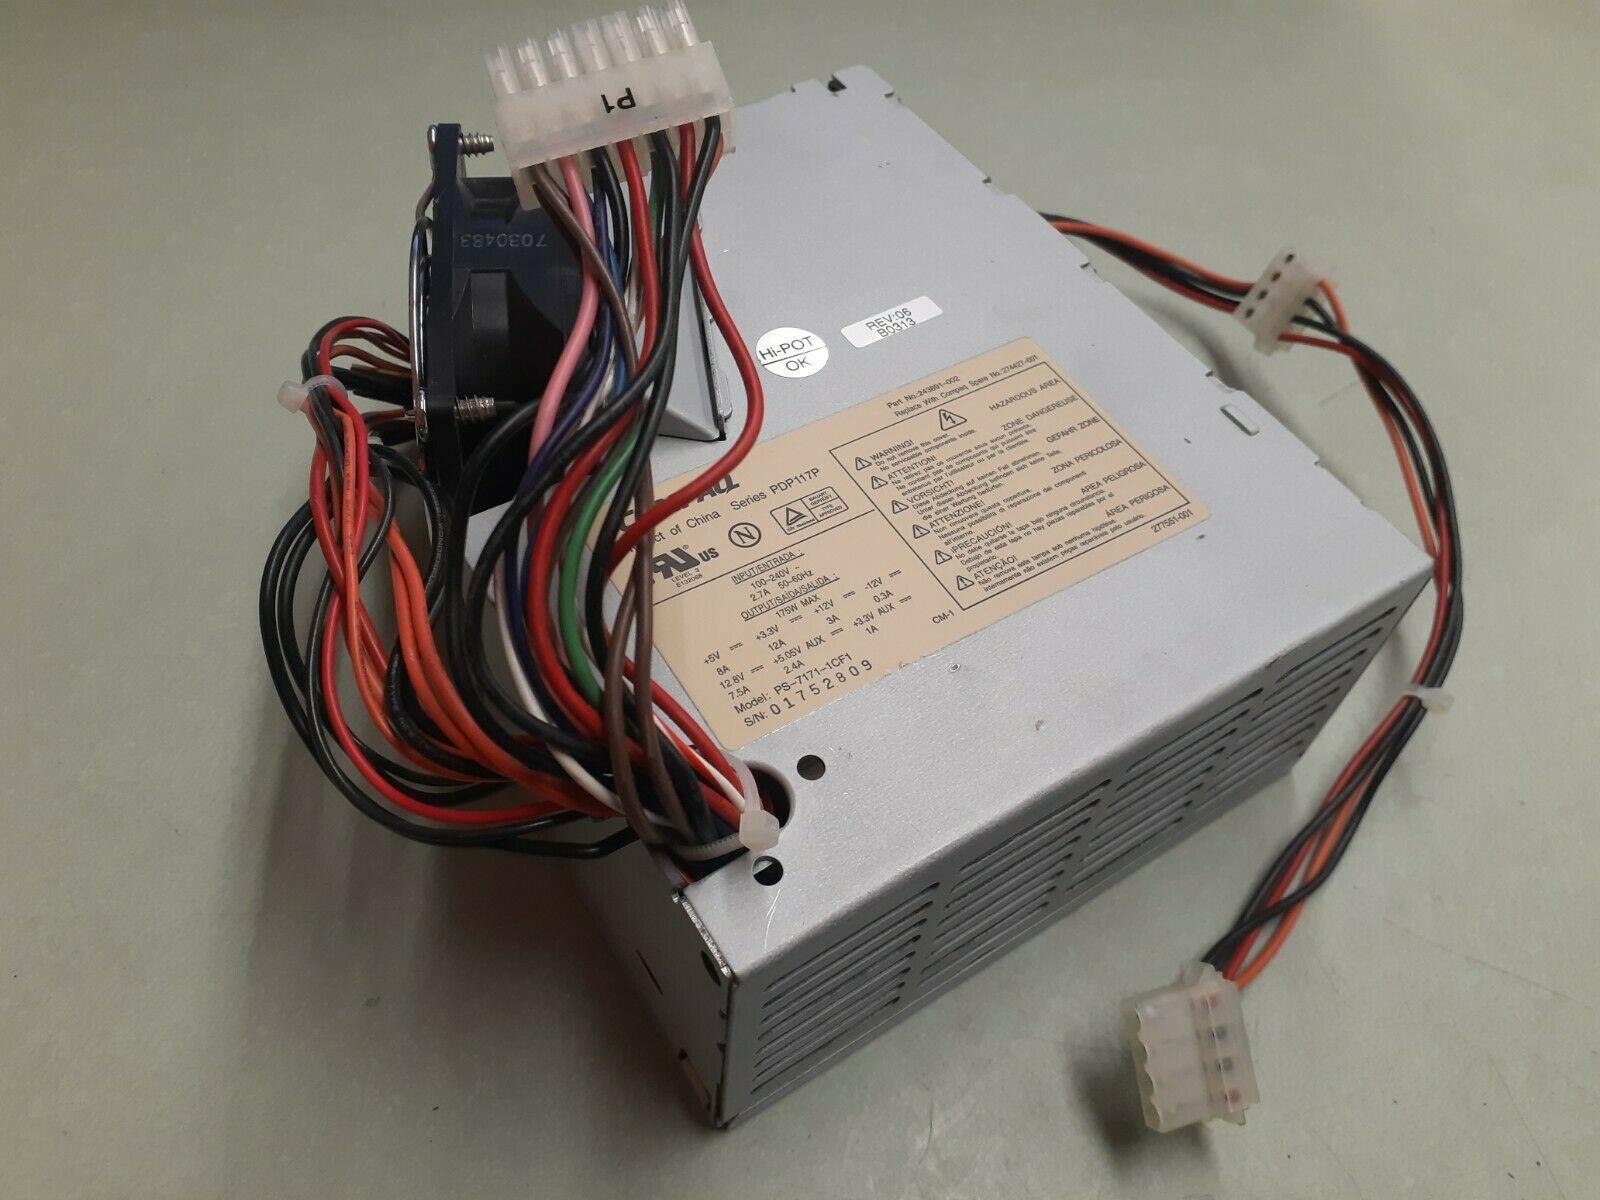 PDP117P 243891 002 274427 001 ps 7171 1cf hp ps 7171 1cf 175w power supply for evo business desktop d500 w4000